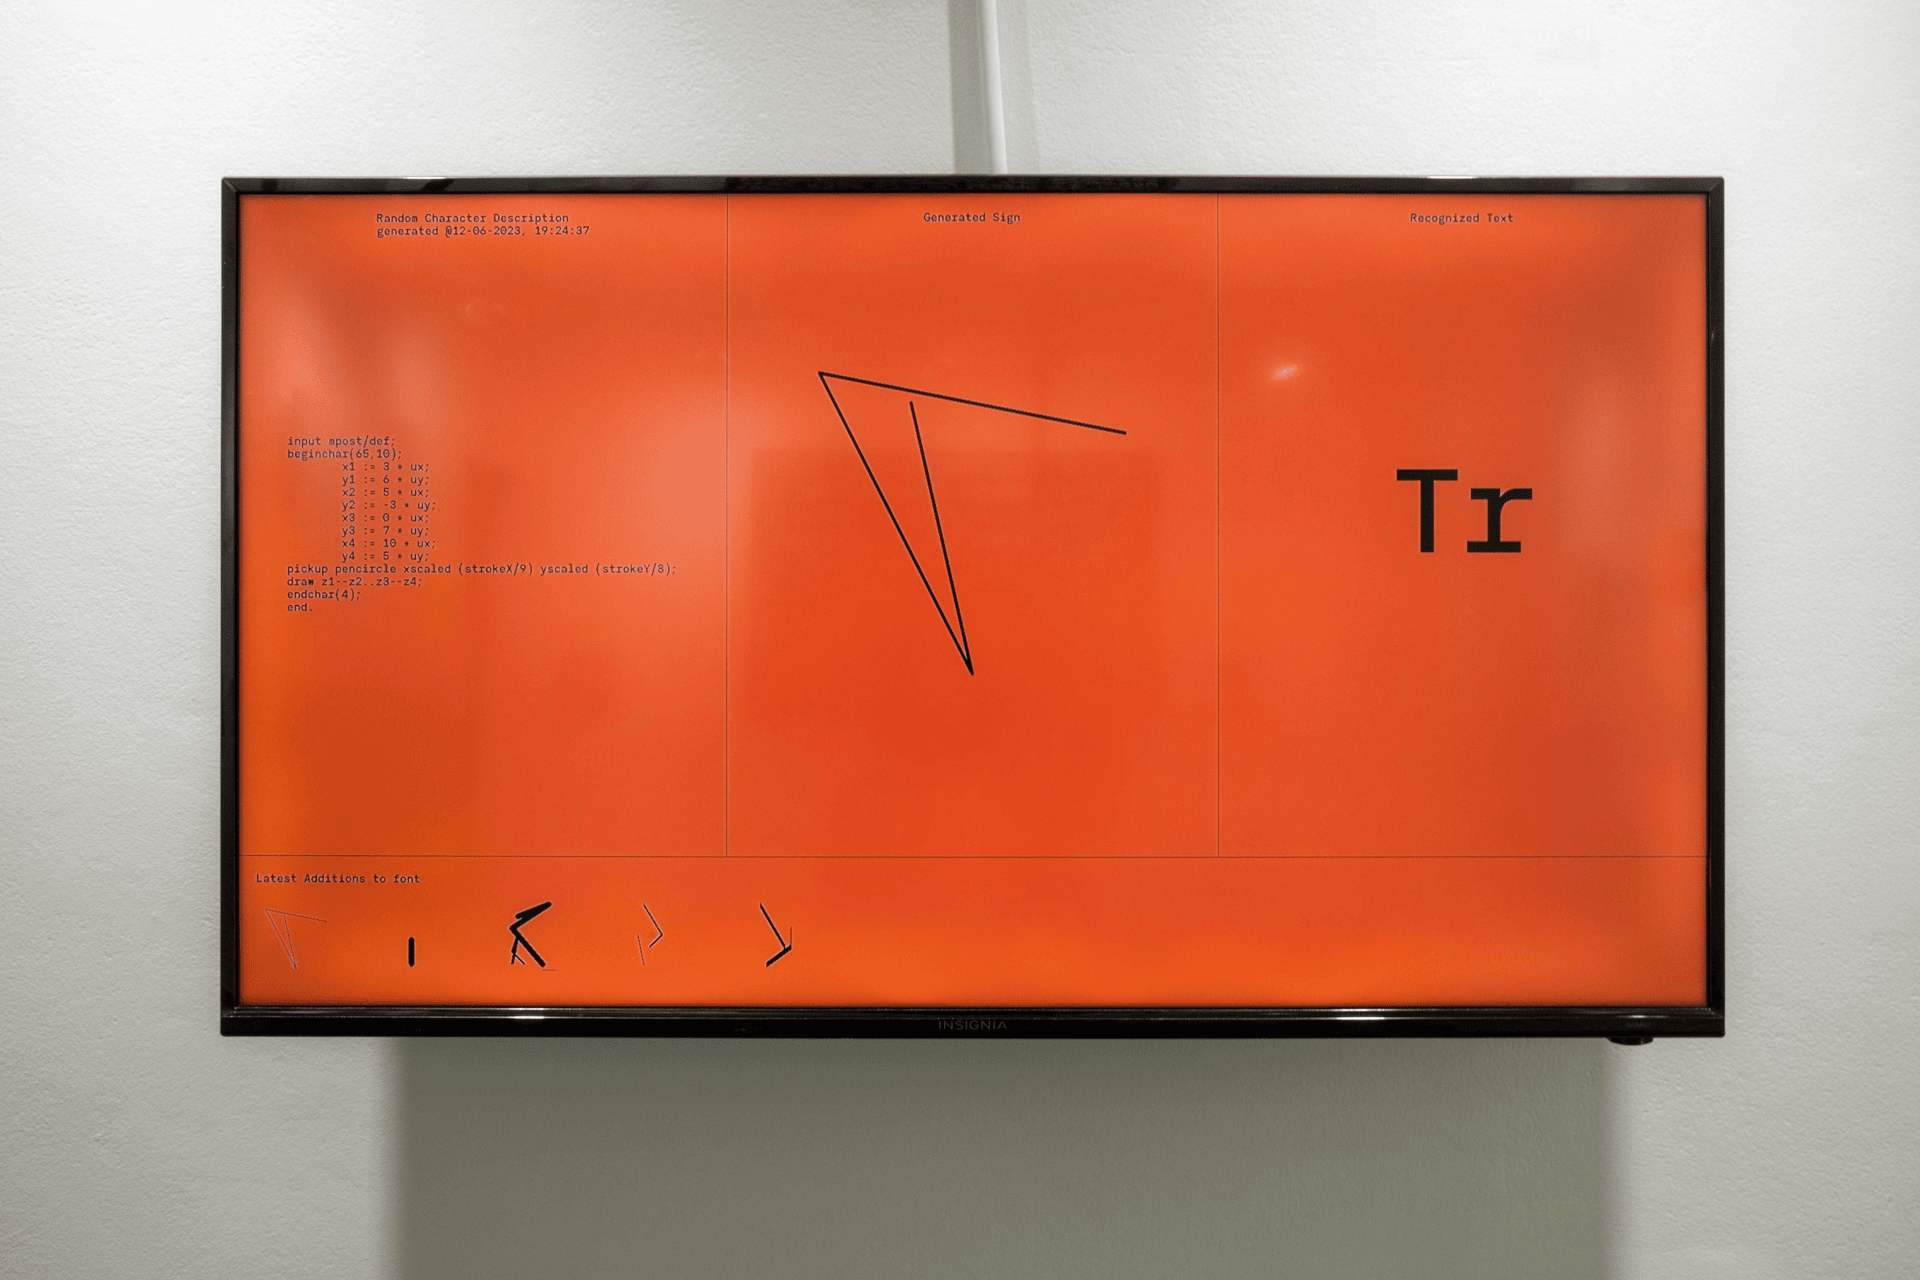 A screen in a museum showing a screen split in three, with — from left to right — a code excerpt, a line drawing in Metafont, and a recognoízed sign reading »Tr«. All on a bright orange background.